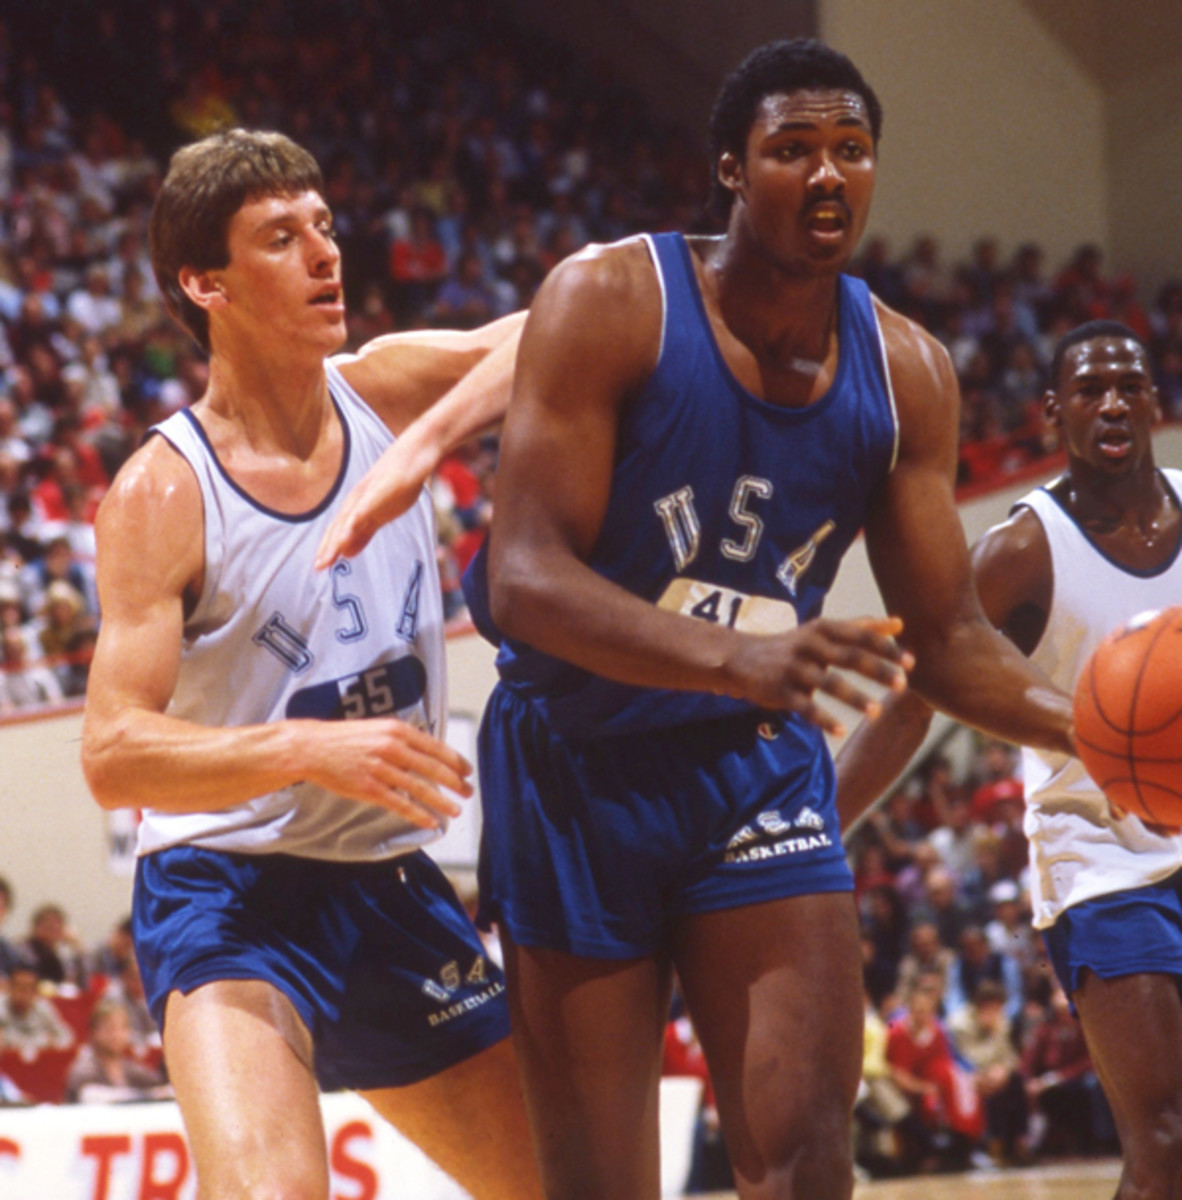 Rare Photos of Karl Malone - Sports Illustrated